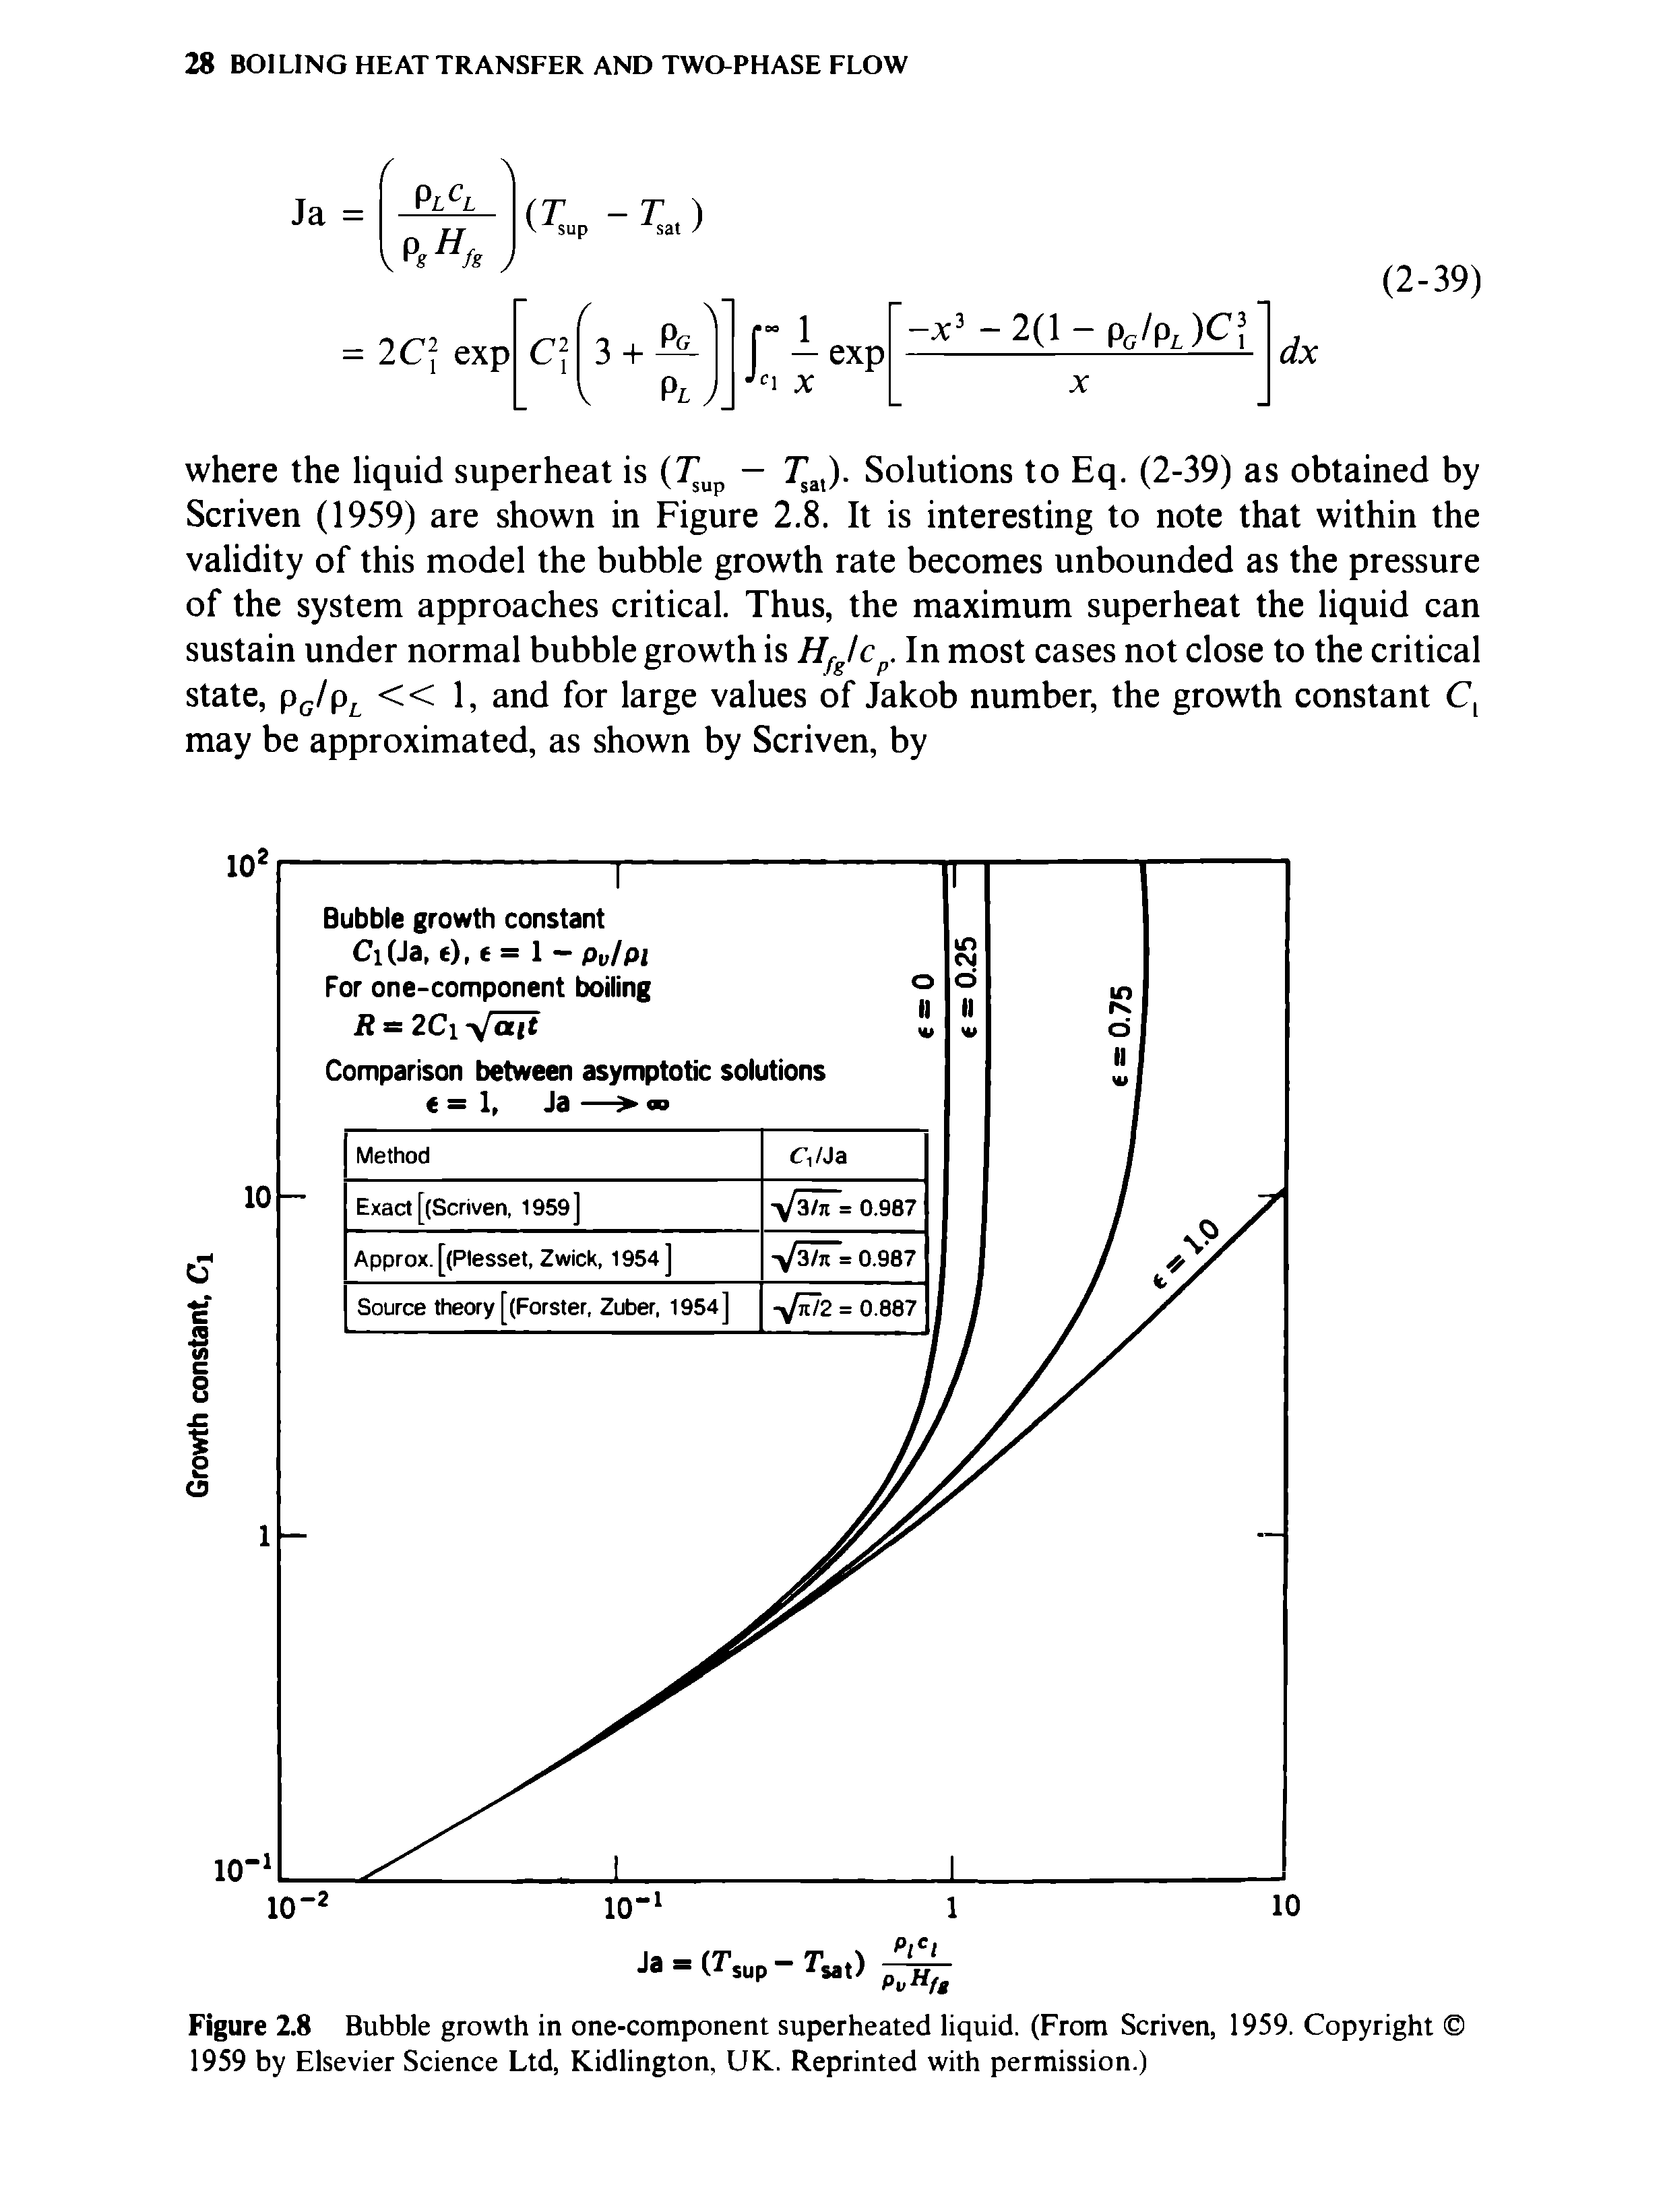 Figure 2.8 Bubble growth in one-component superheated liquid. (From Scriven, 1959. Copyright 1959 by Elsevier Science Ltd, Kidlington, UK. Reprinted with permission.)...